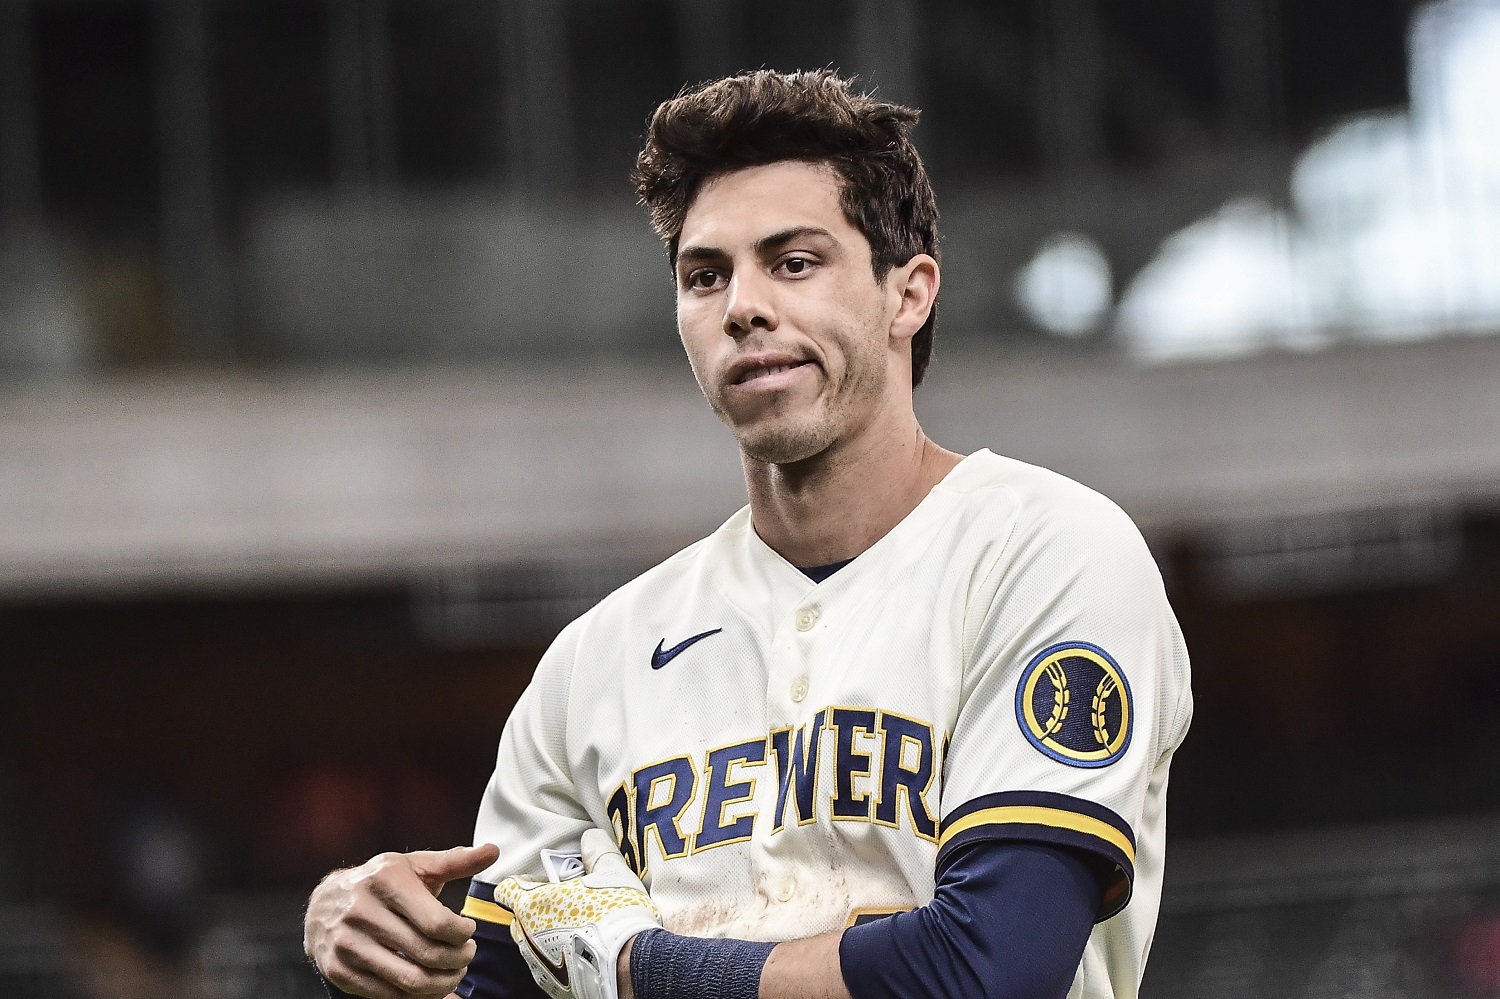 Do the Brewers Need to Trade Christian Yelich? - Brewers - Brewer Fanatic